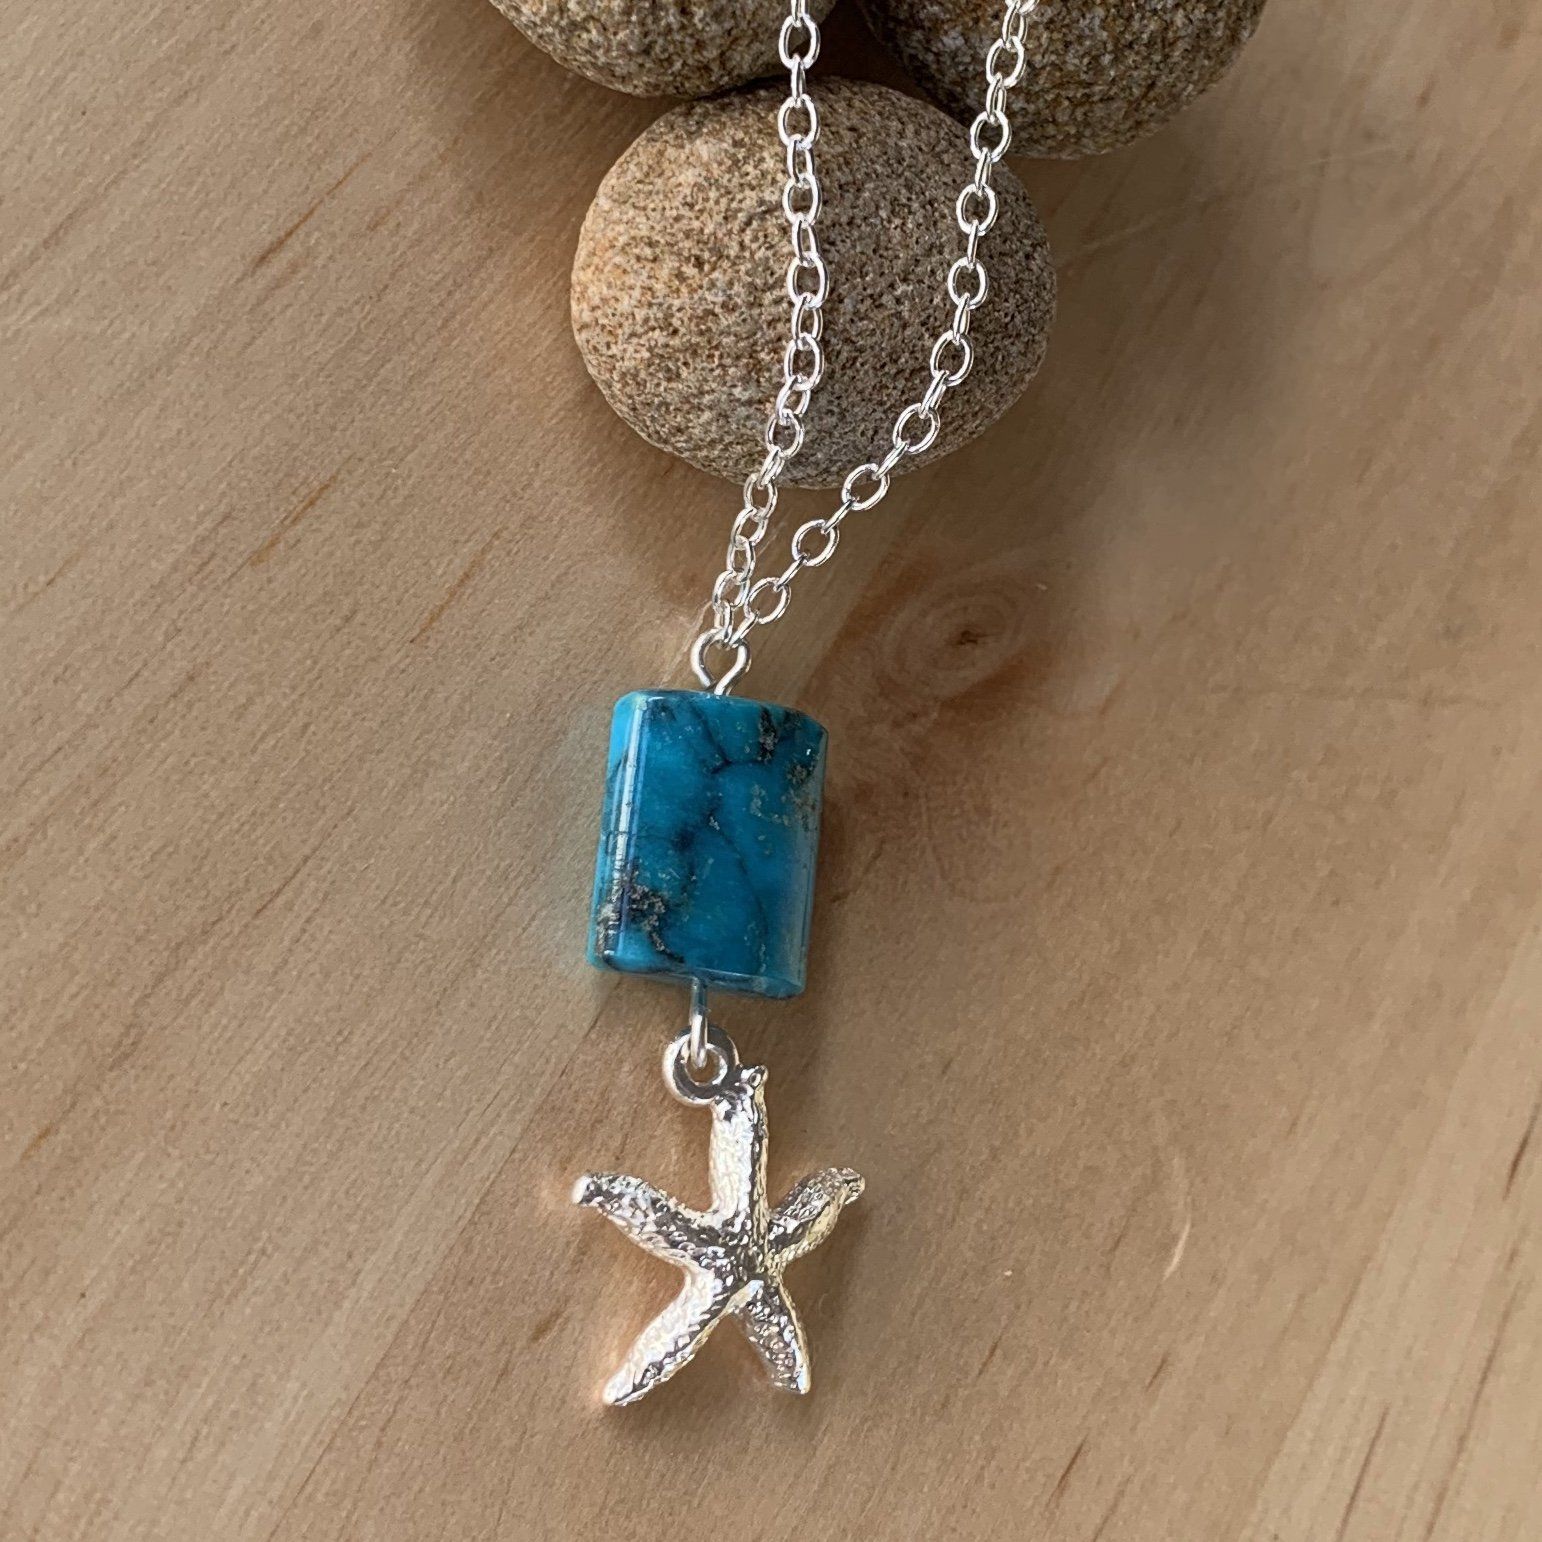 Handmade Recycled Turquoise Gemstone and Starfish Sterling Silver Necklace